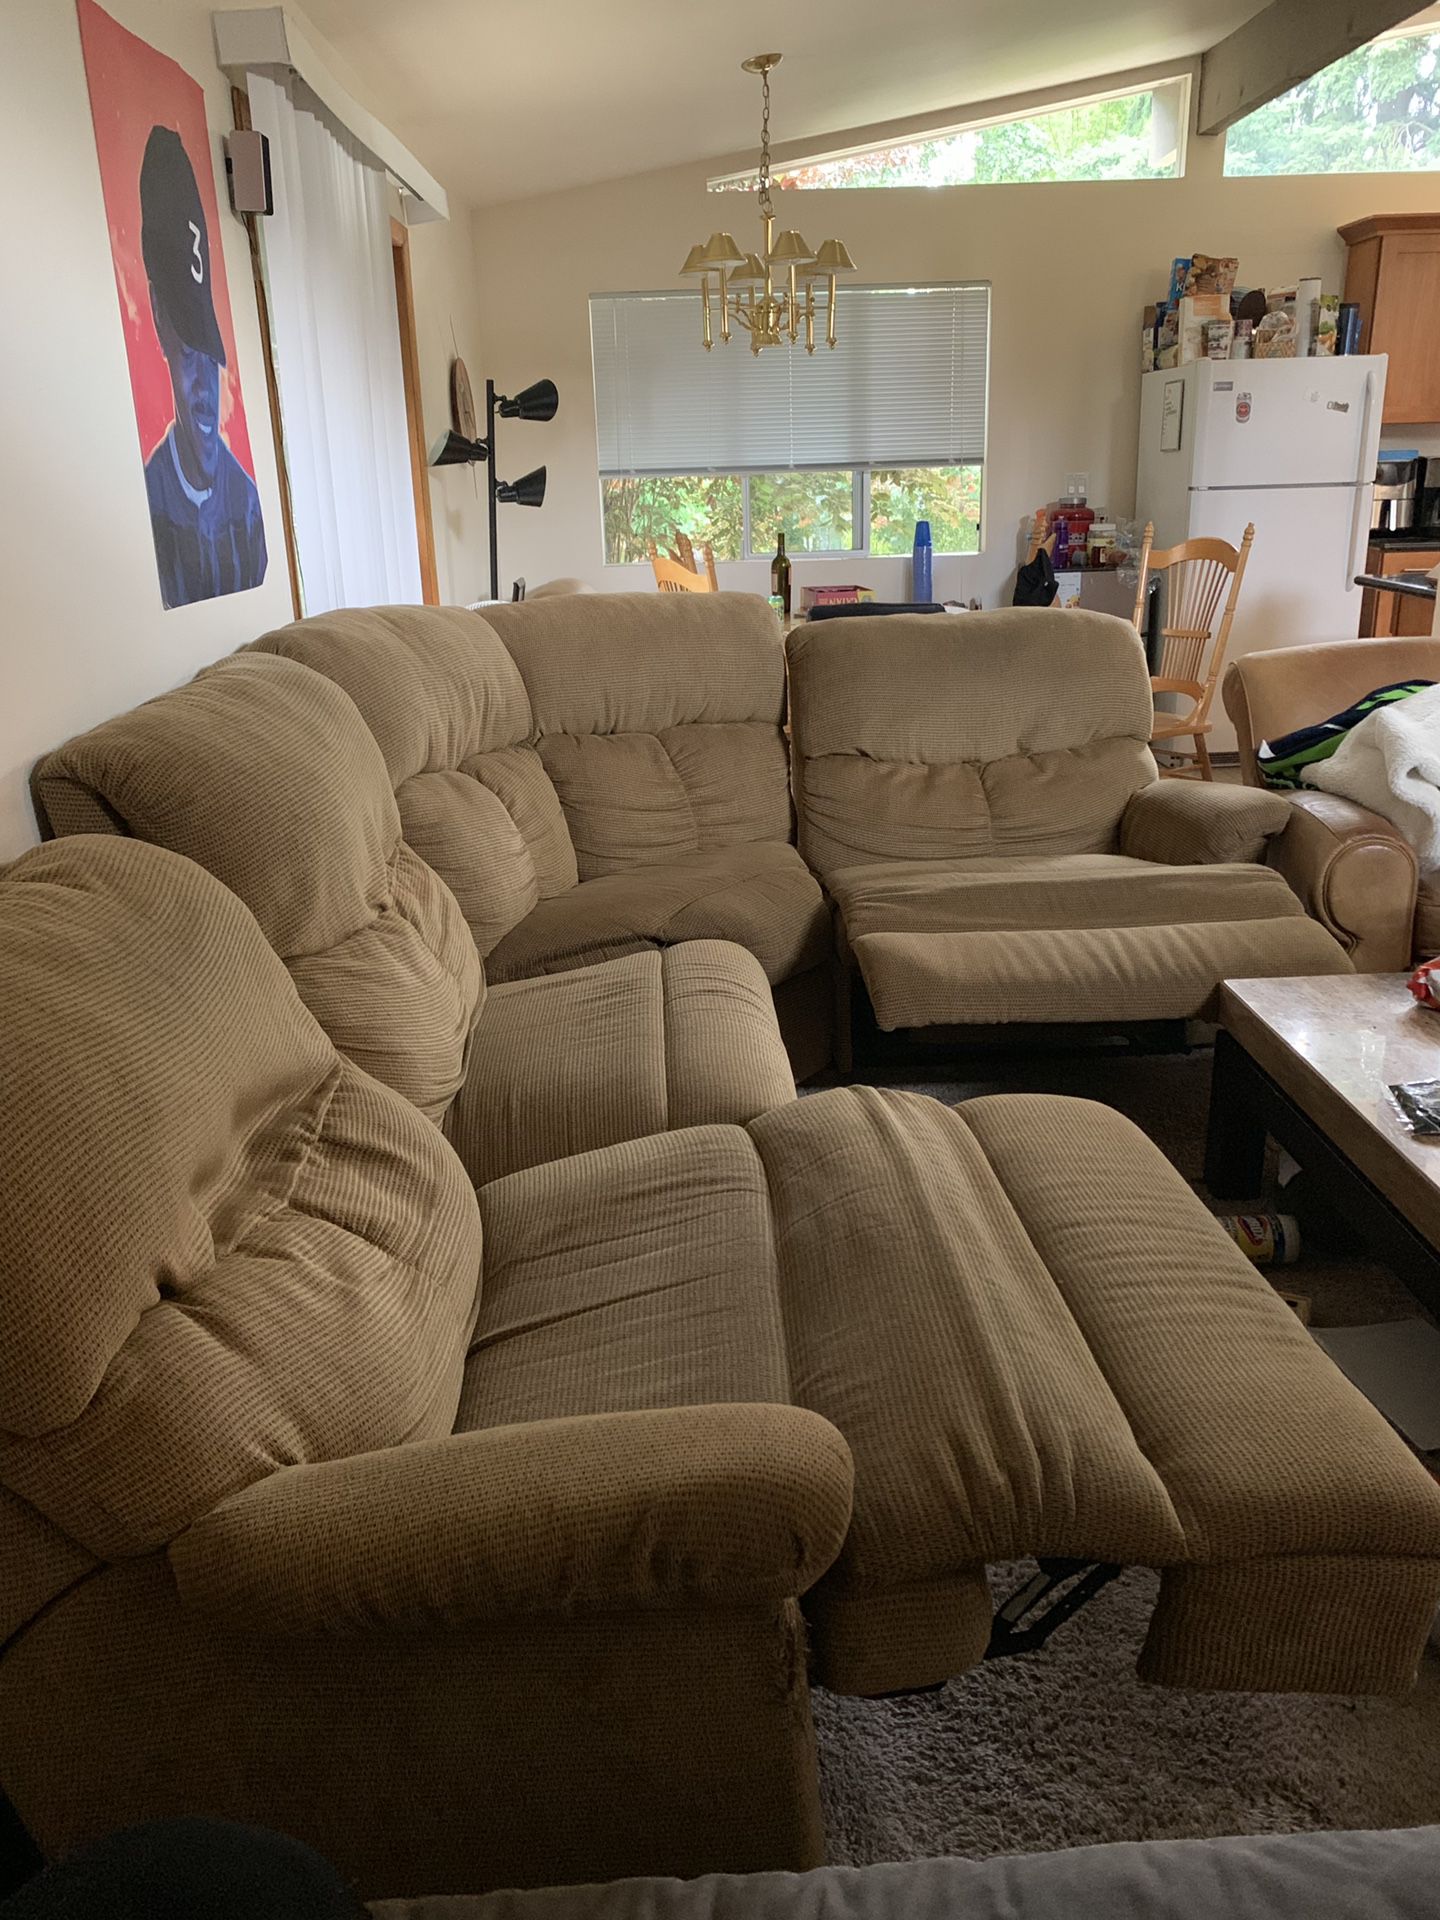 Large brown sectional couch $100 OBO